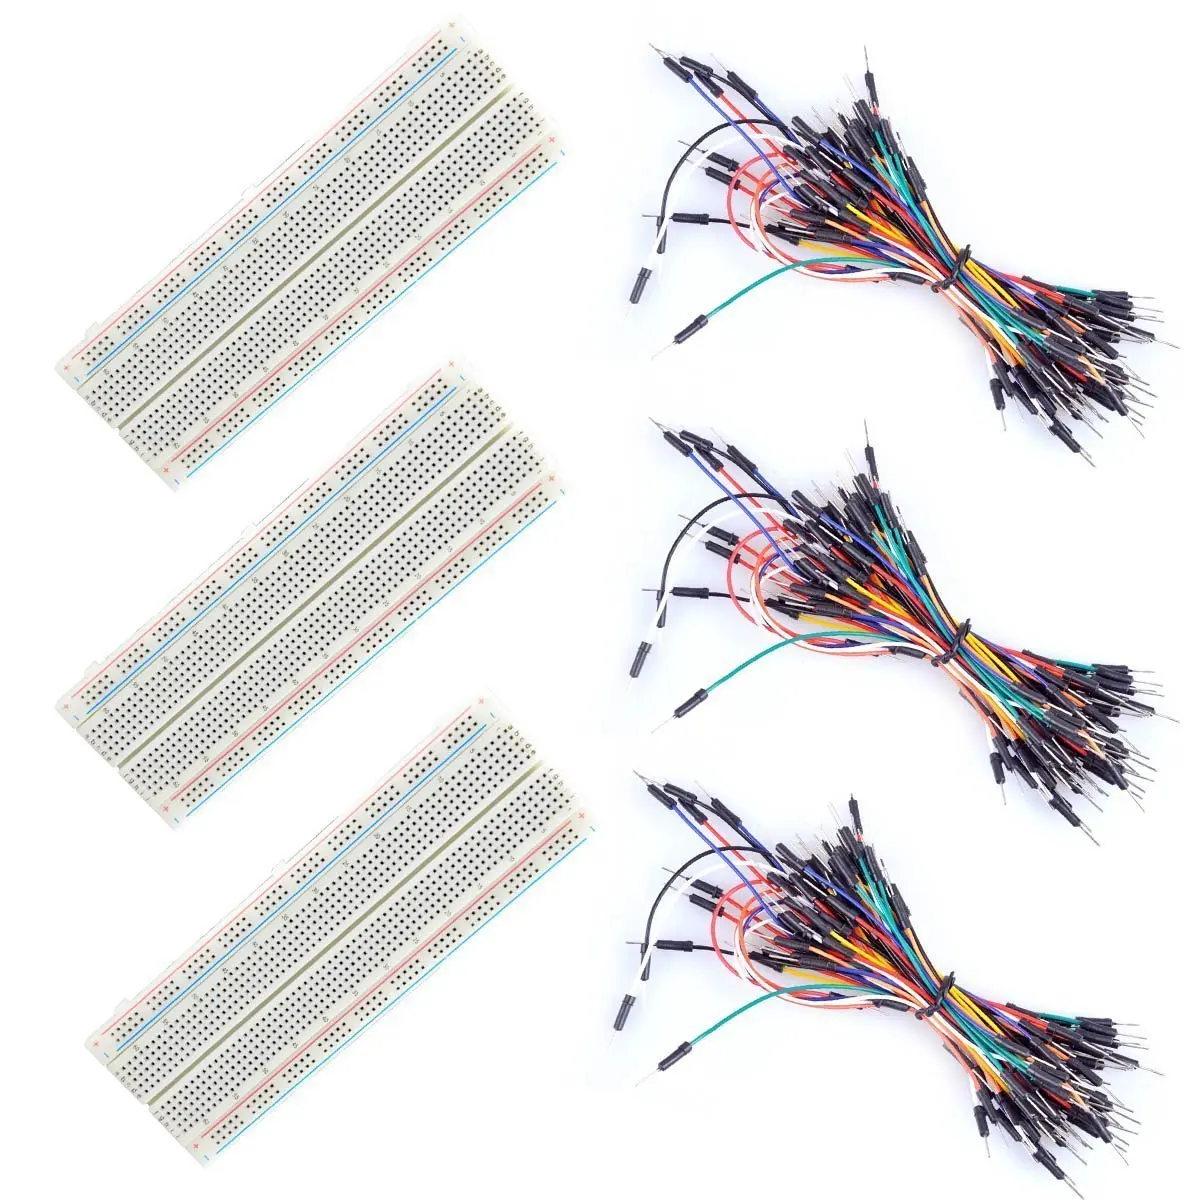 

3 Pcs 830 point Proyotype Solderless Pcb Breadboards With 3 Tie Jumper Wires For Arduino